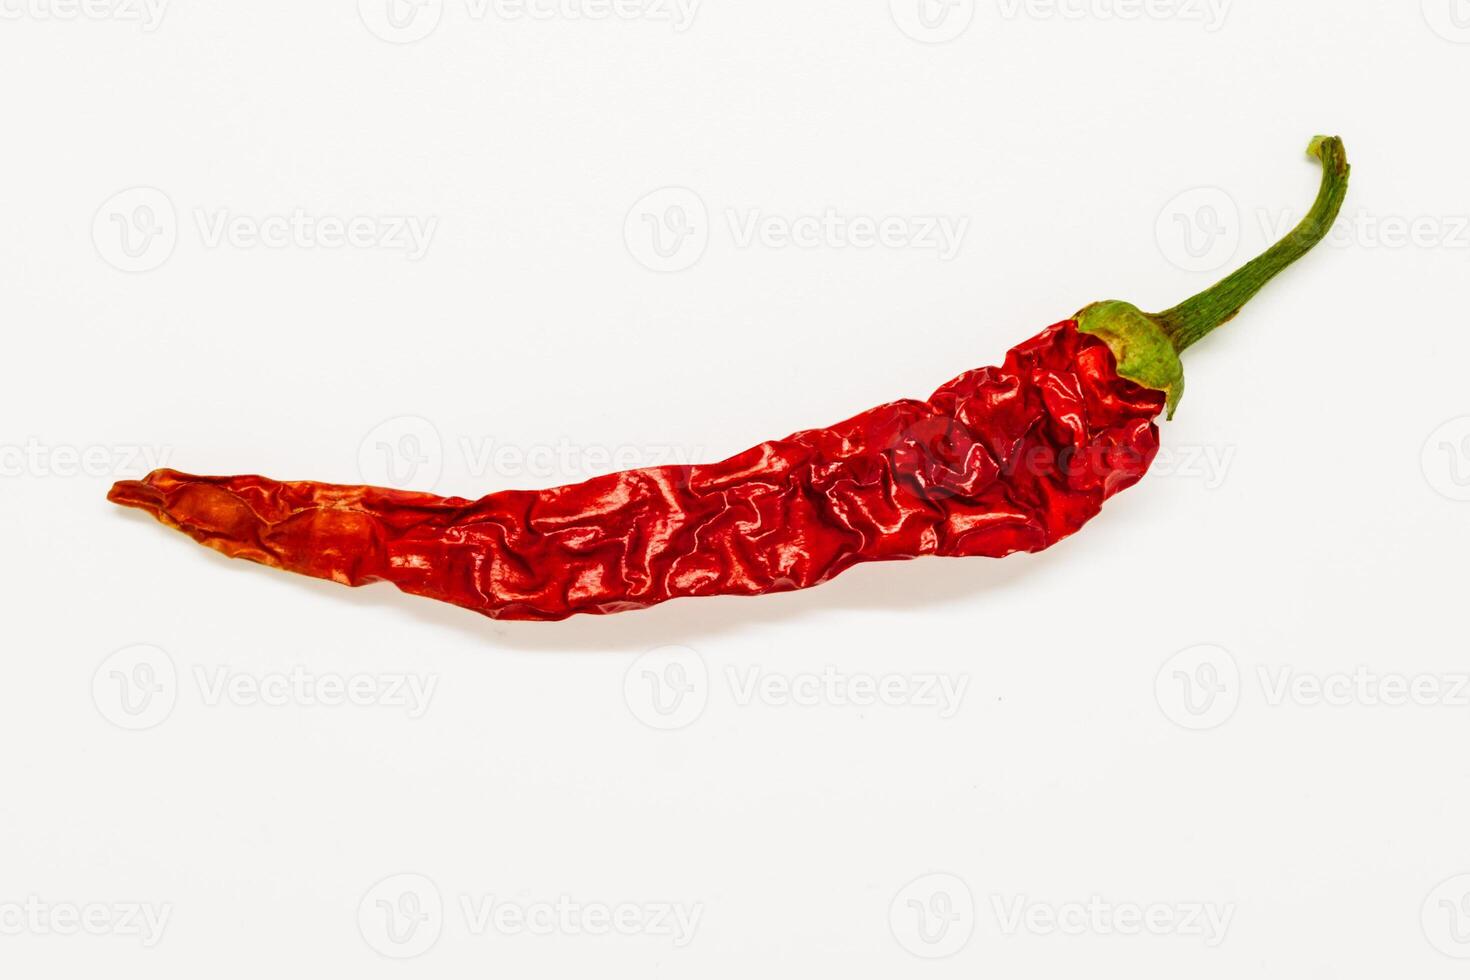 Dried red chili pepper, many benefits, stimulates the appetite and blood circulation, relieves muscle pain, antibacterial, capsicum annuum photo